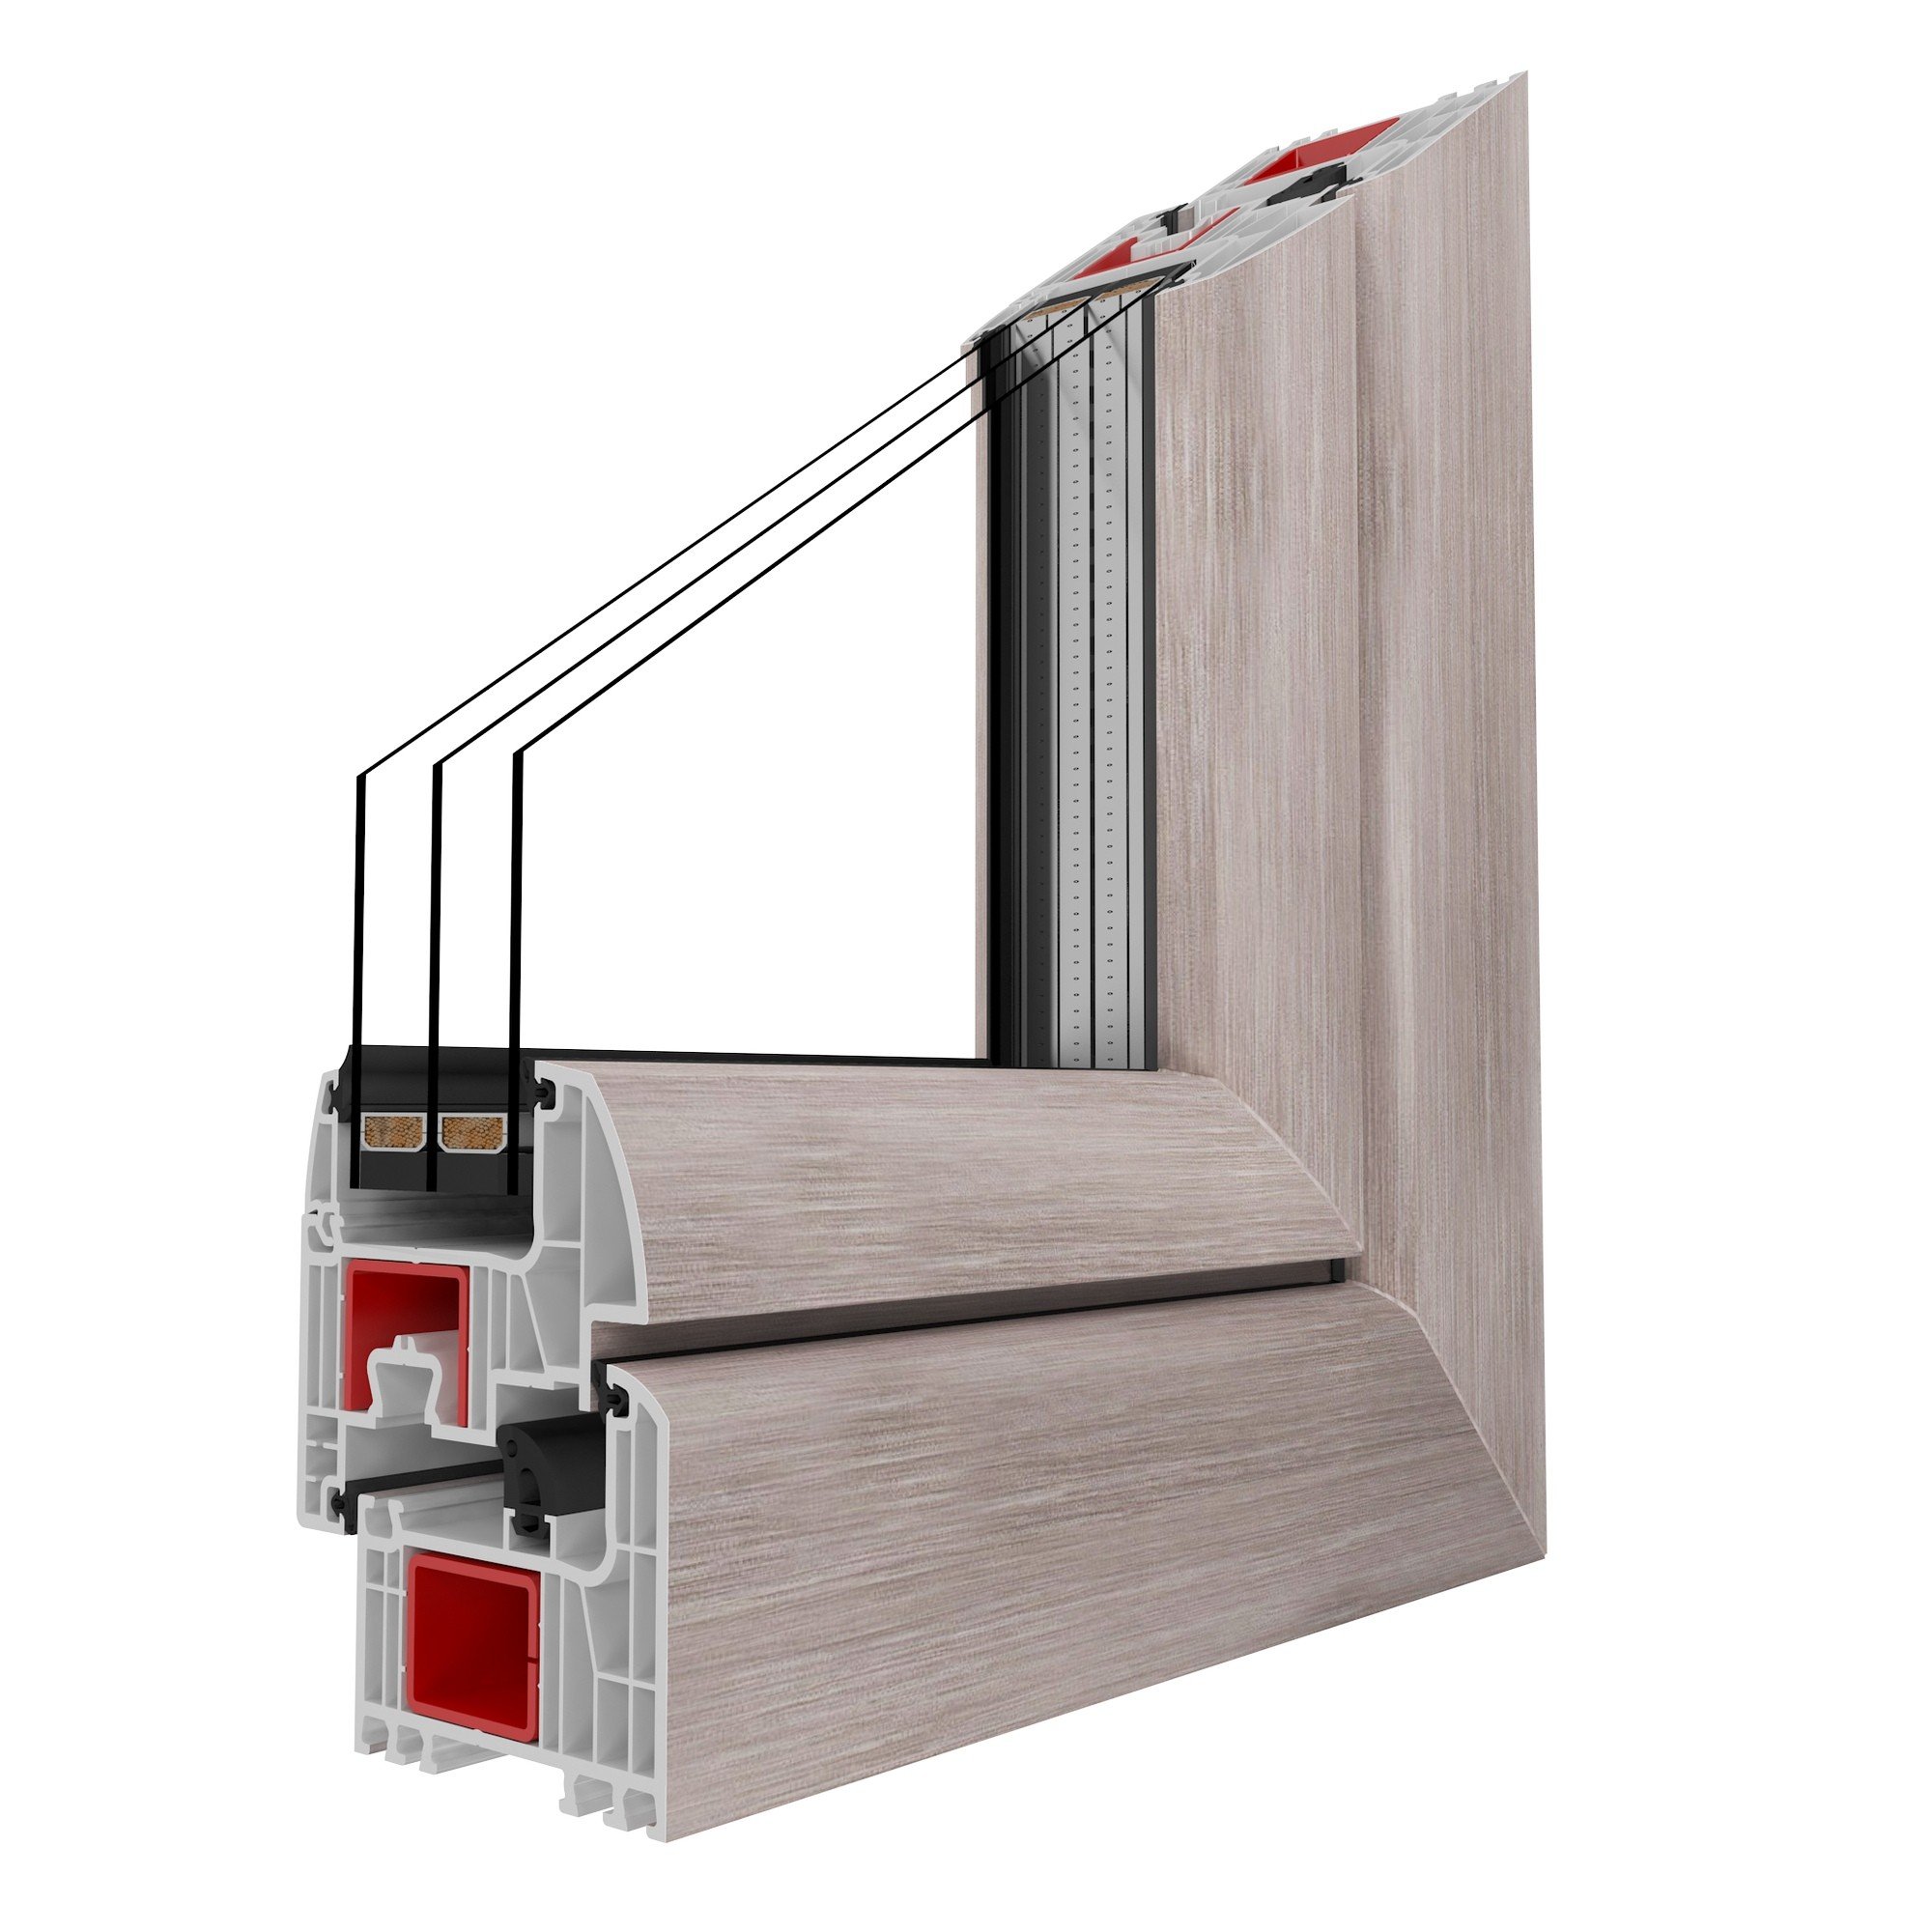 DRUTEX windows available in a new, trendy color! 